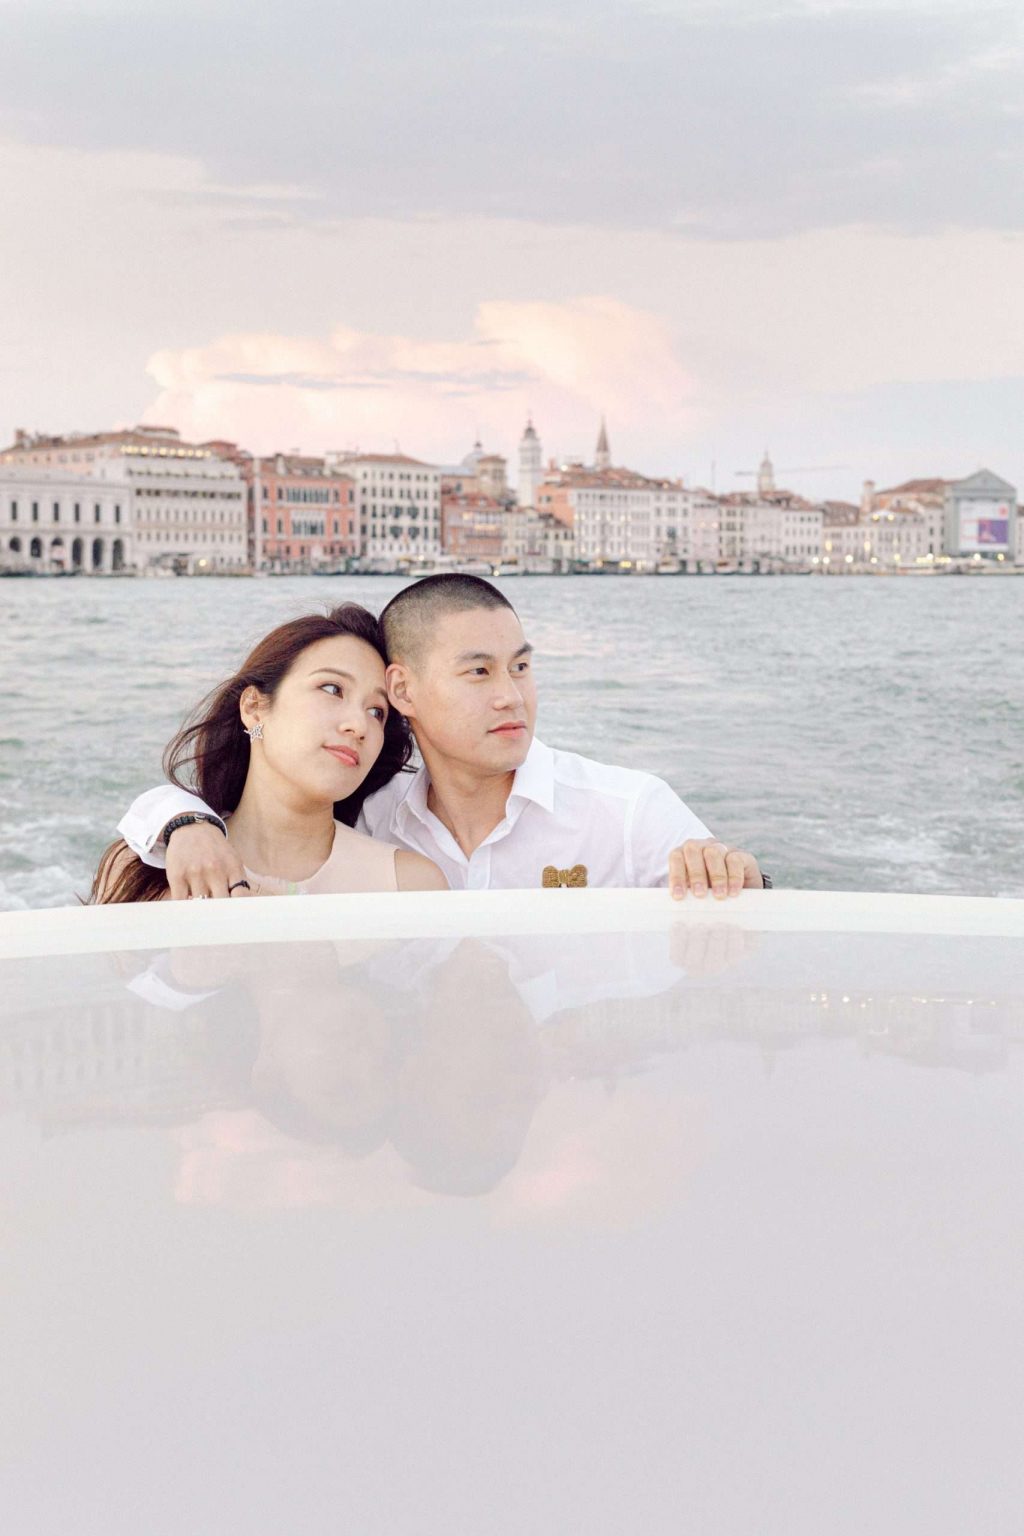 Elope to Italy | Italy Elopement Photographer, Camilla M, Venice Elopement Piazza San Marco watertaxi